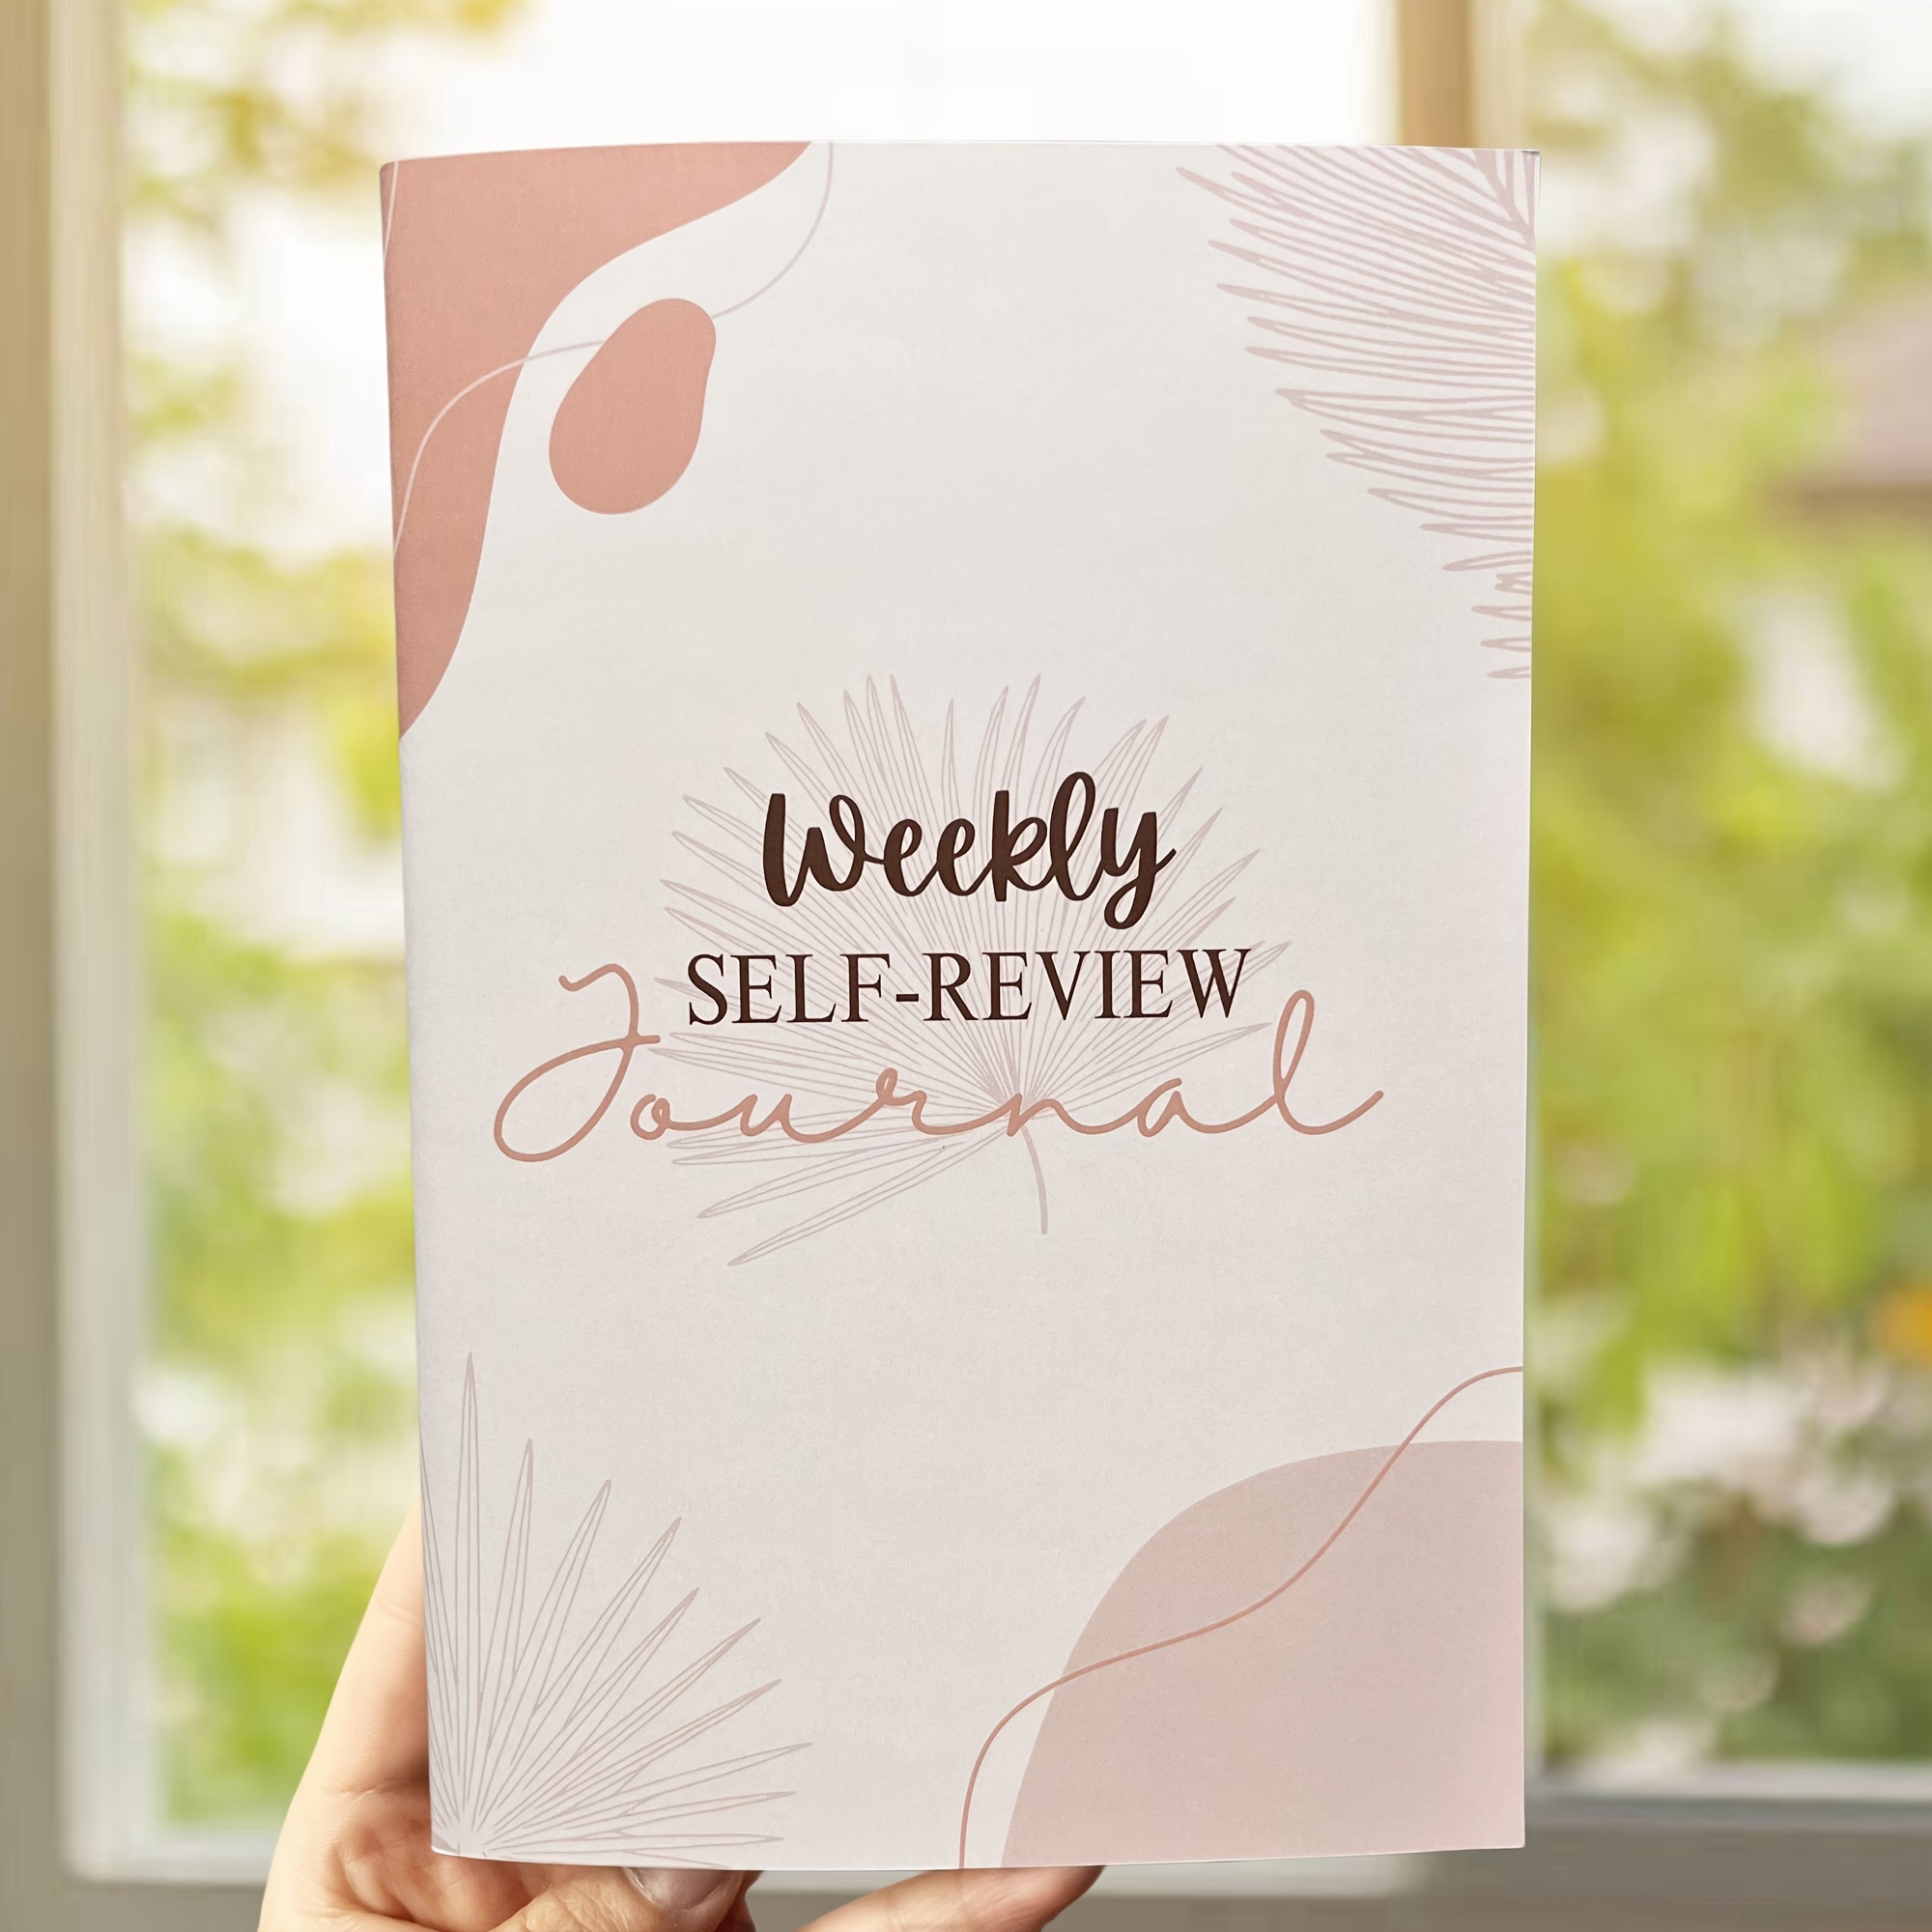 

Weekly Self-review Log, Weekly Work/achievement Progress And Review, Weekly Positive Attitude And Gratitude Mentality Cultivation, Weekly Review Of Areas That Can Be Improved